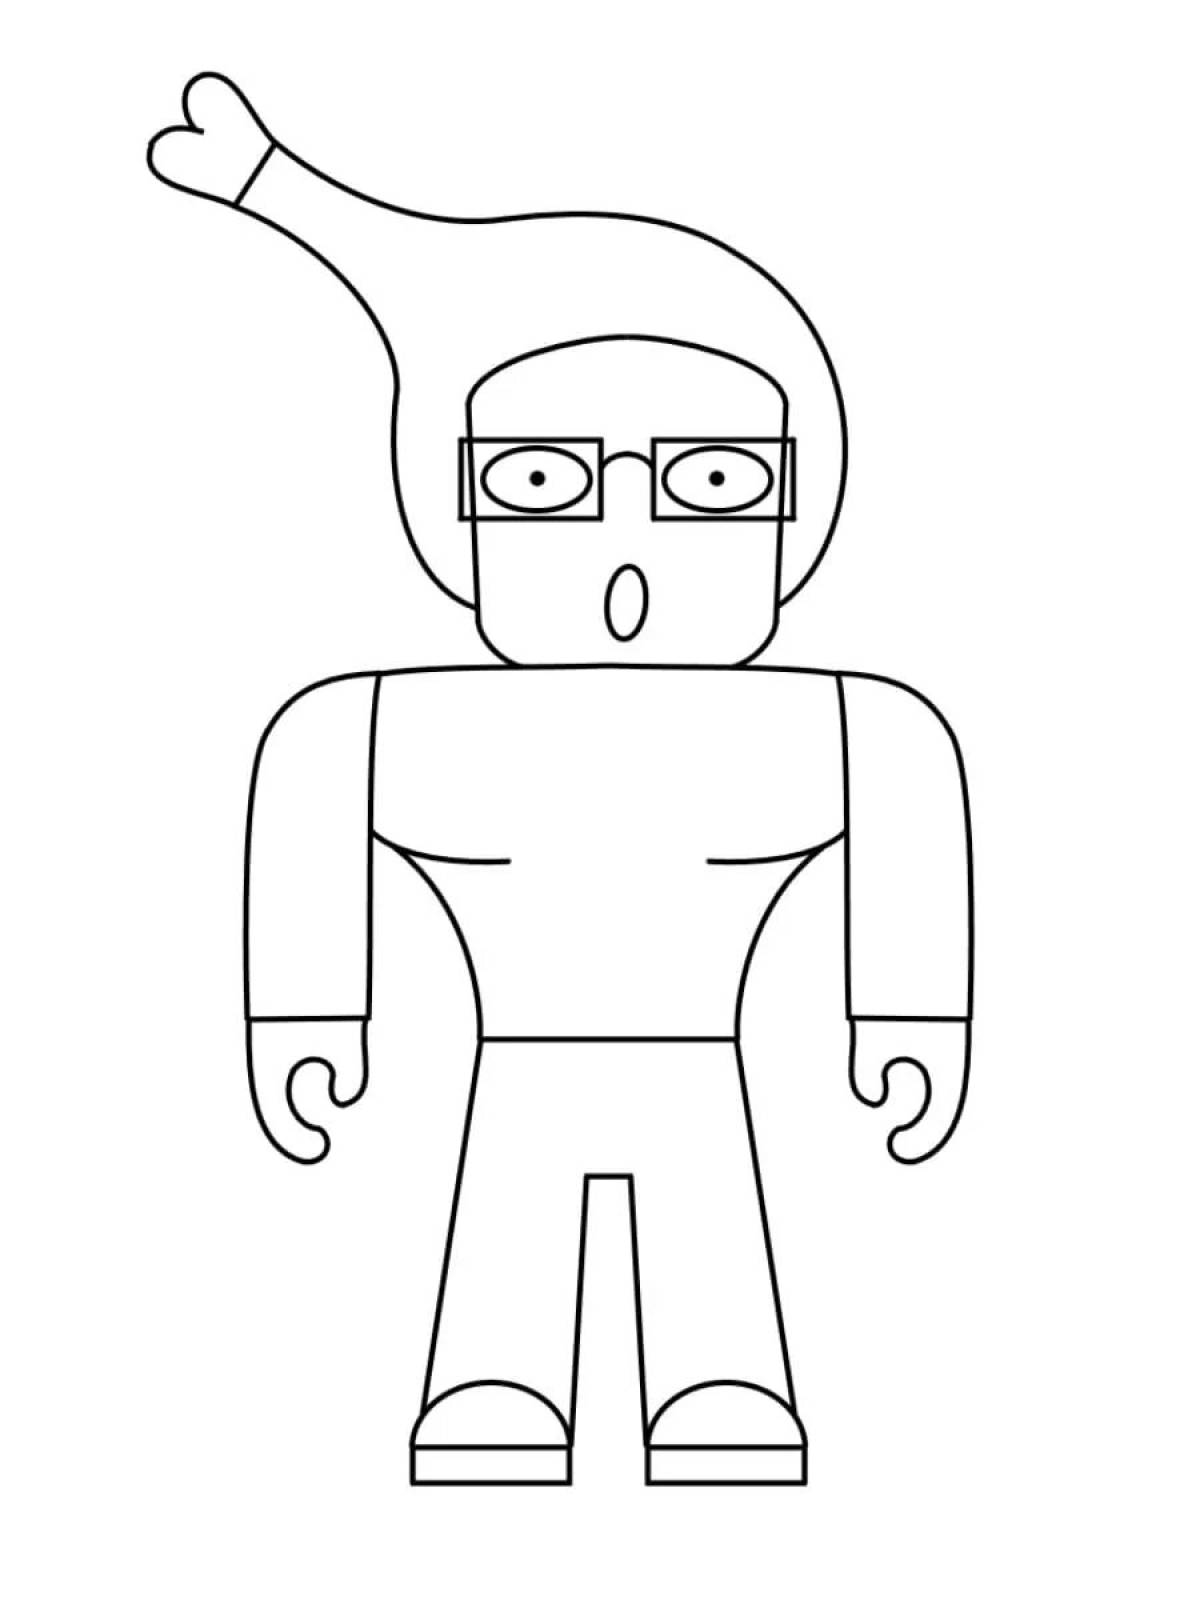 Color shiny roblox player coloring book